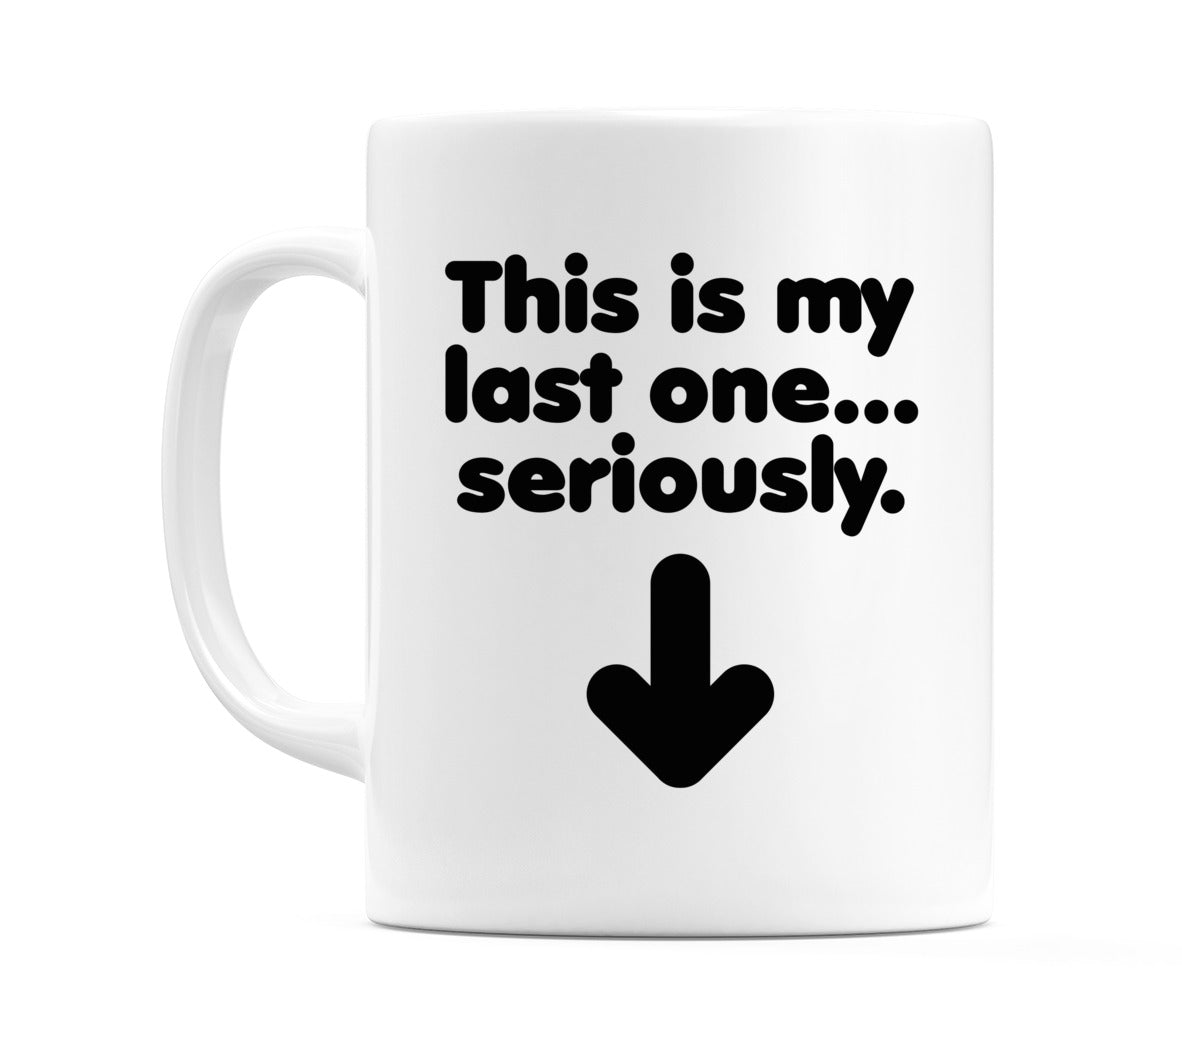 This is my last one... seriously Mug